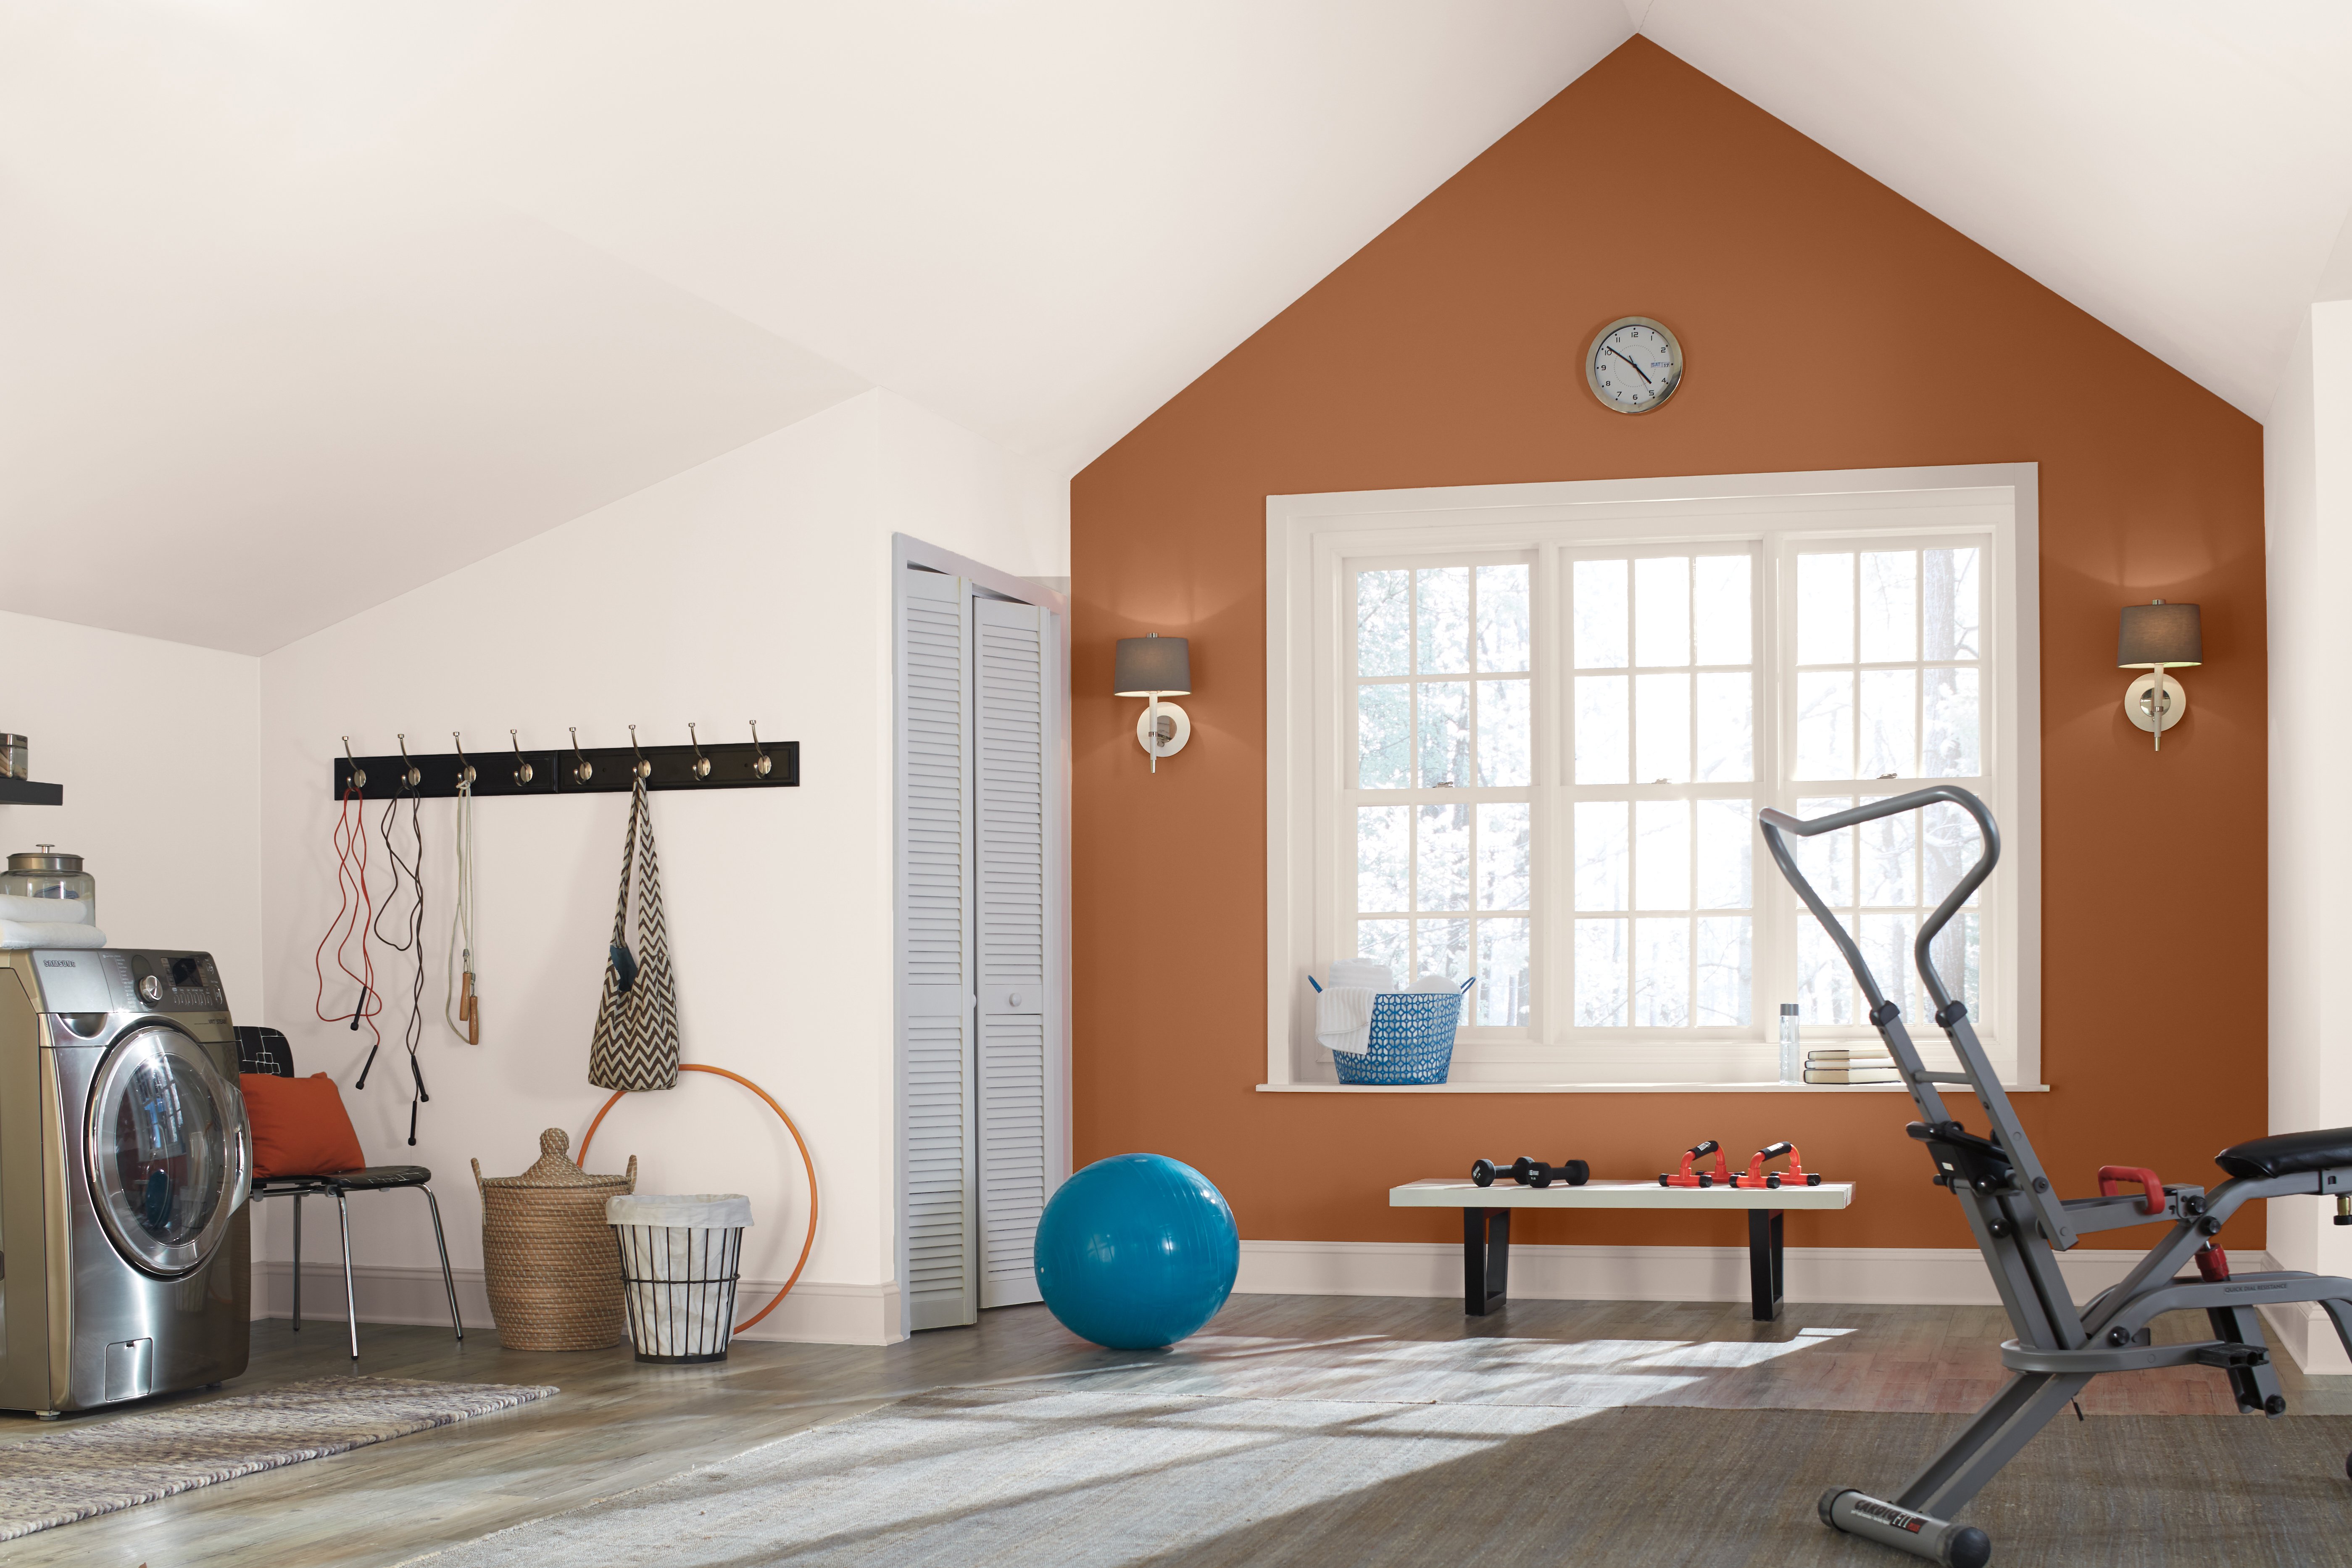 A large multi-purpose room  painted in a white color, there is a terra cotta color featured as an accent wall.  
The accent color is called Maple Glaze and it helps highlight the architecture of this room. 